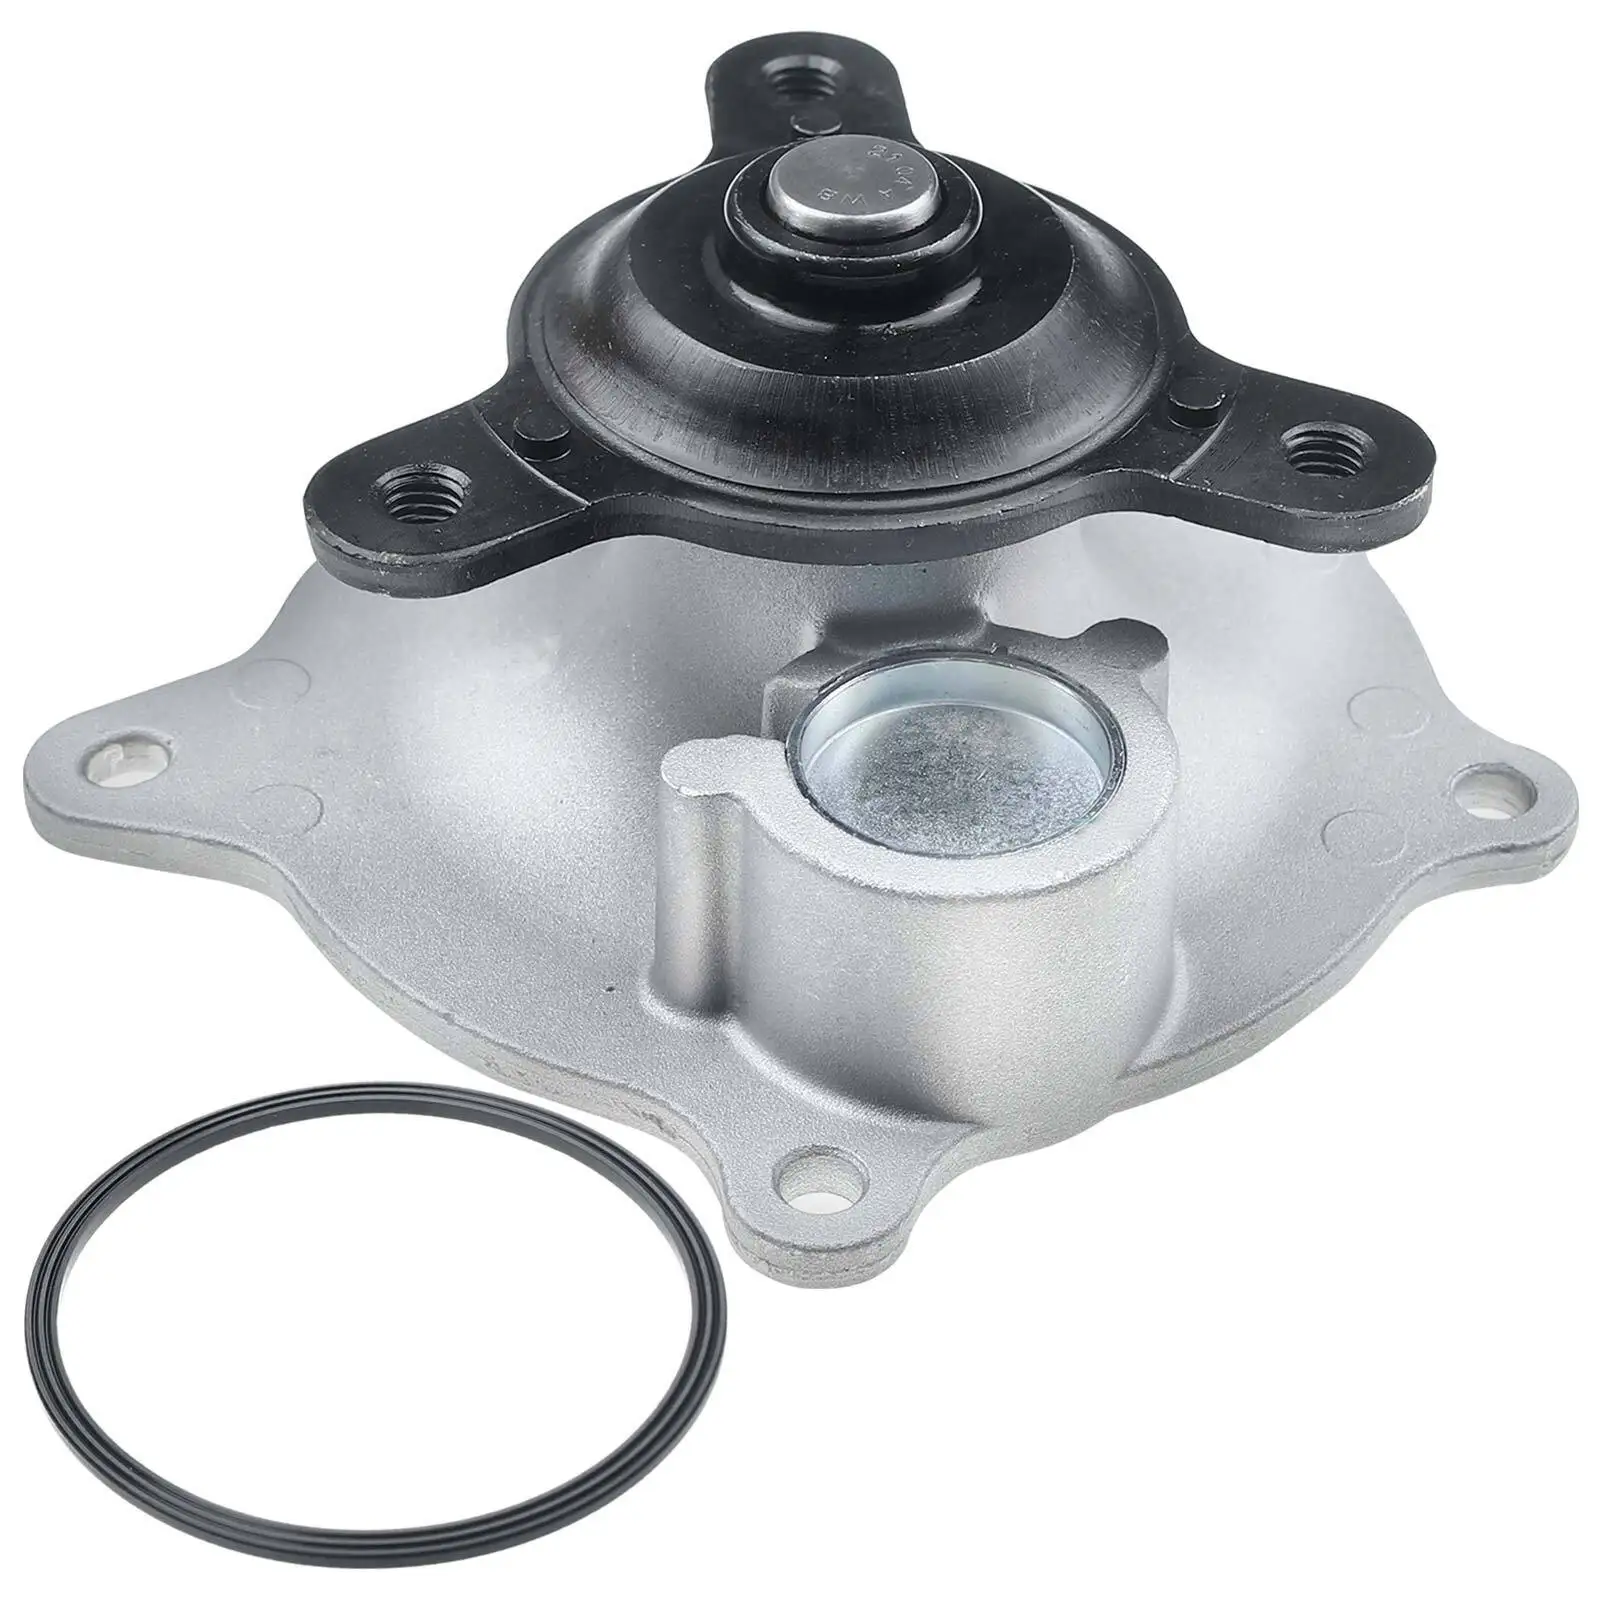 

A3 Wholesales GMR CN US UK Engine Water Pump for Chrysler Town Country Voyager 01-07 Caravan V6 3.3L 3.8L 04781157AC